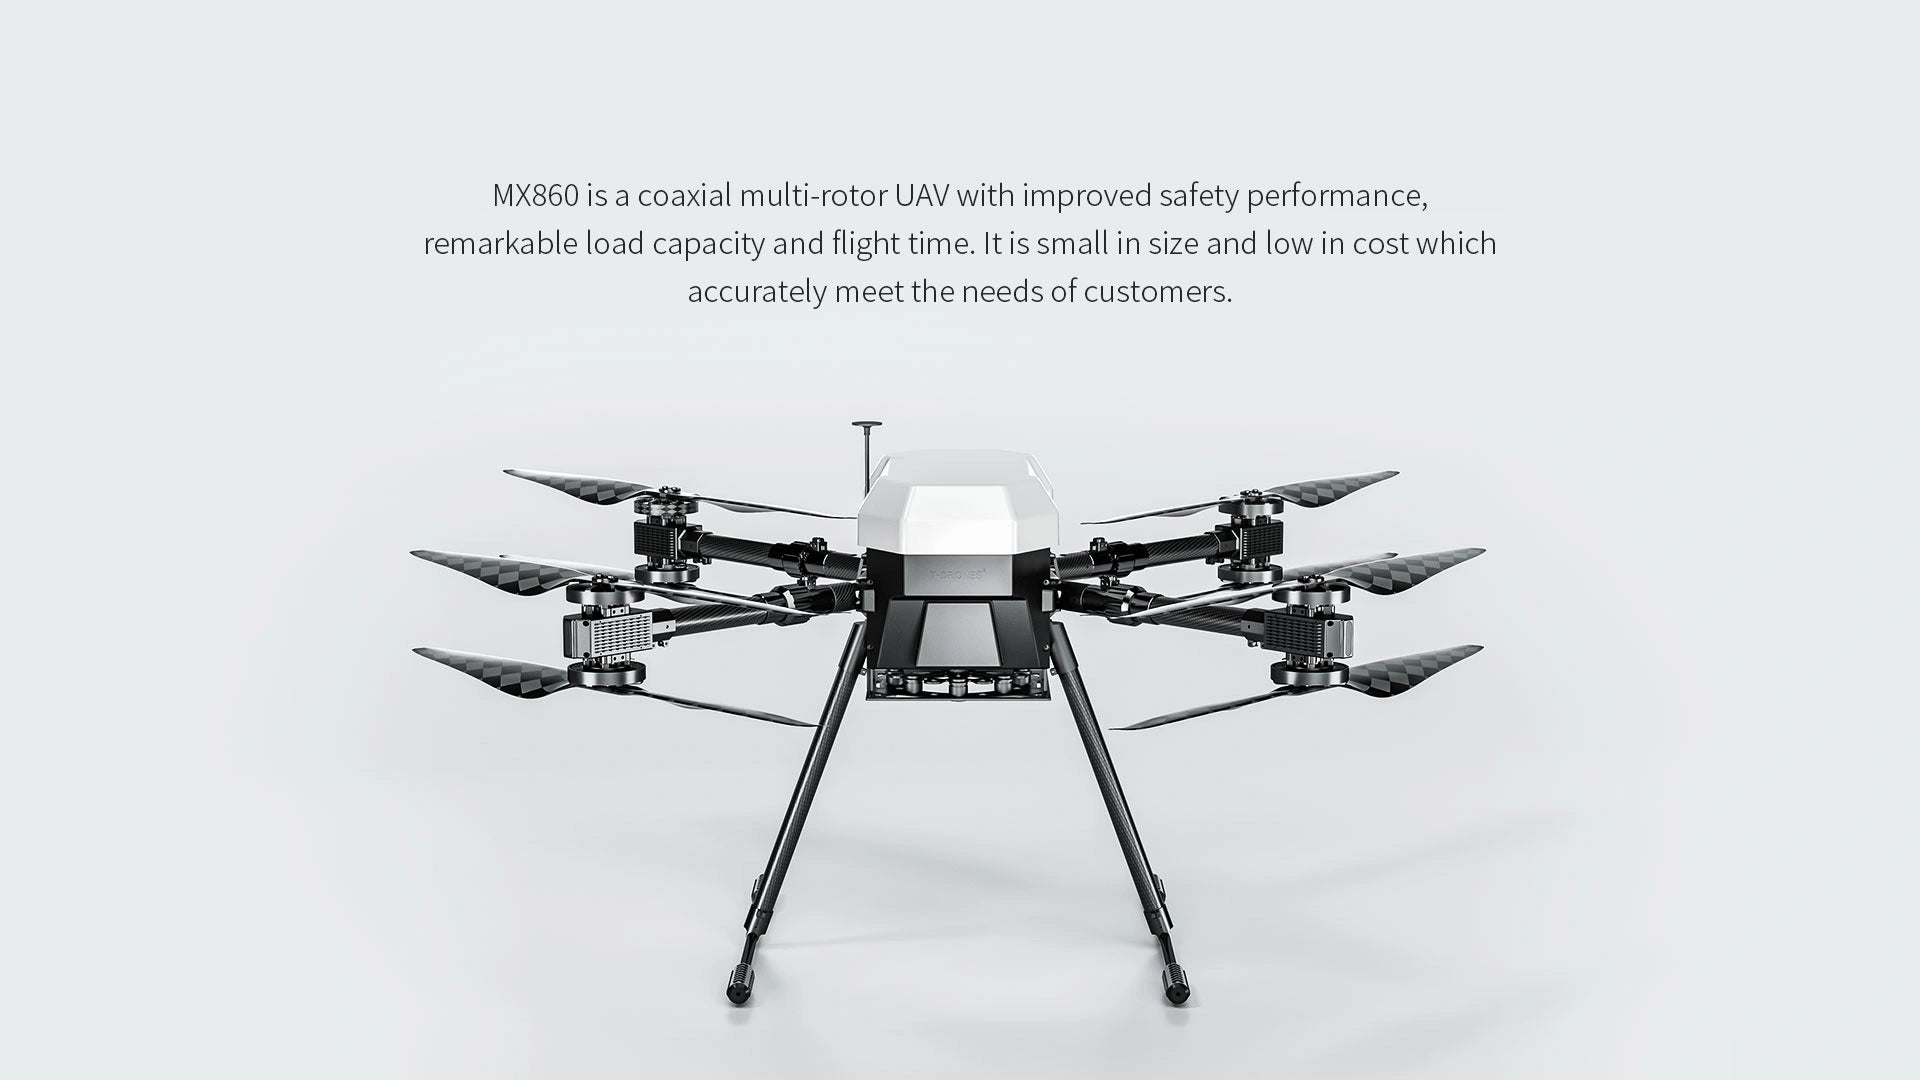 T-Motor T-Drone, MX860 is a coaxial multi-rotor UAV with improved safety performance